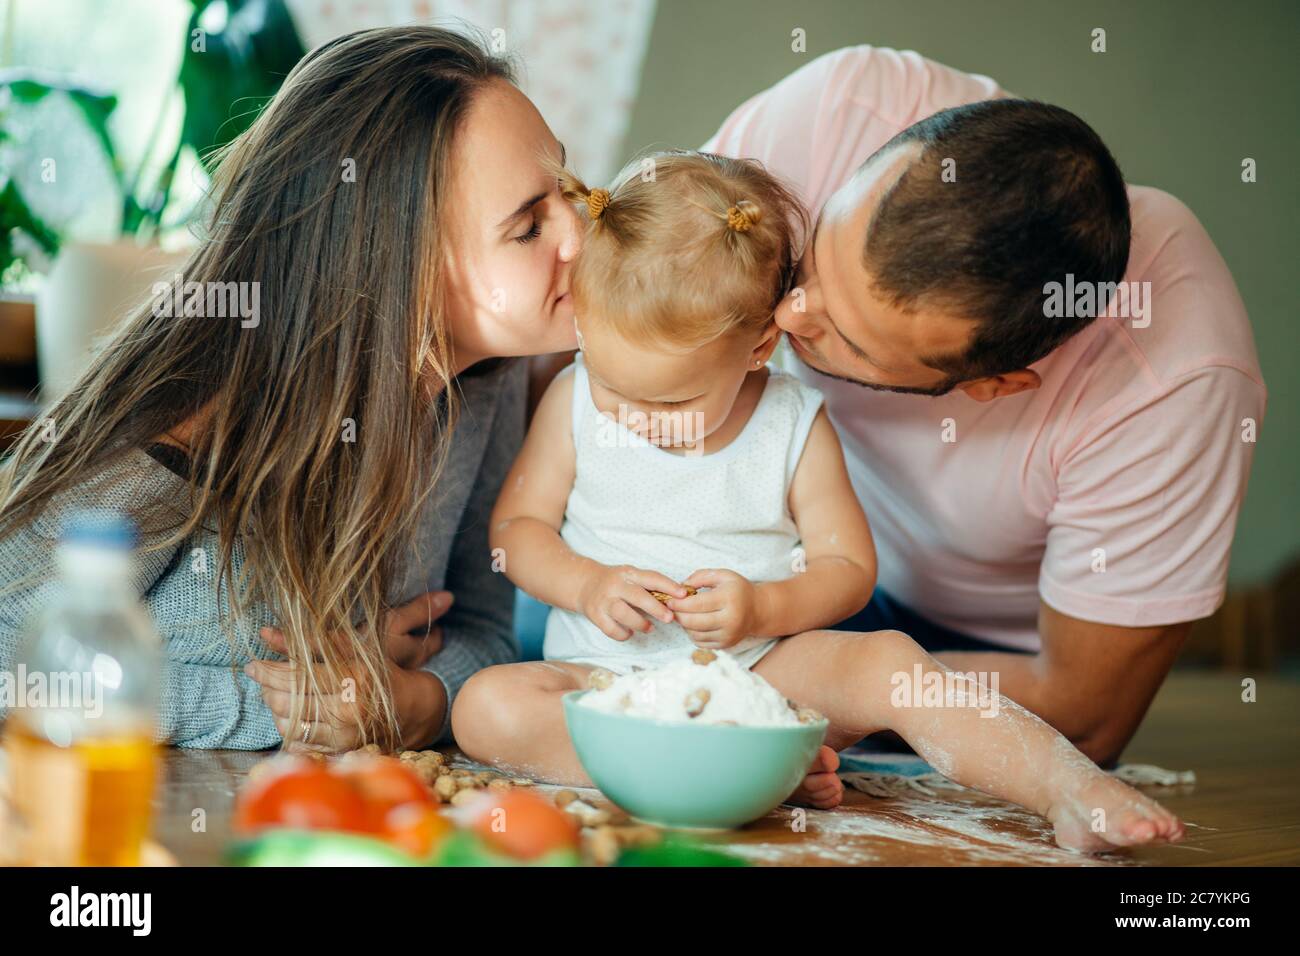 Happy parents kissing their baby in home Stock Photo